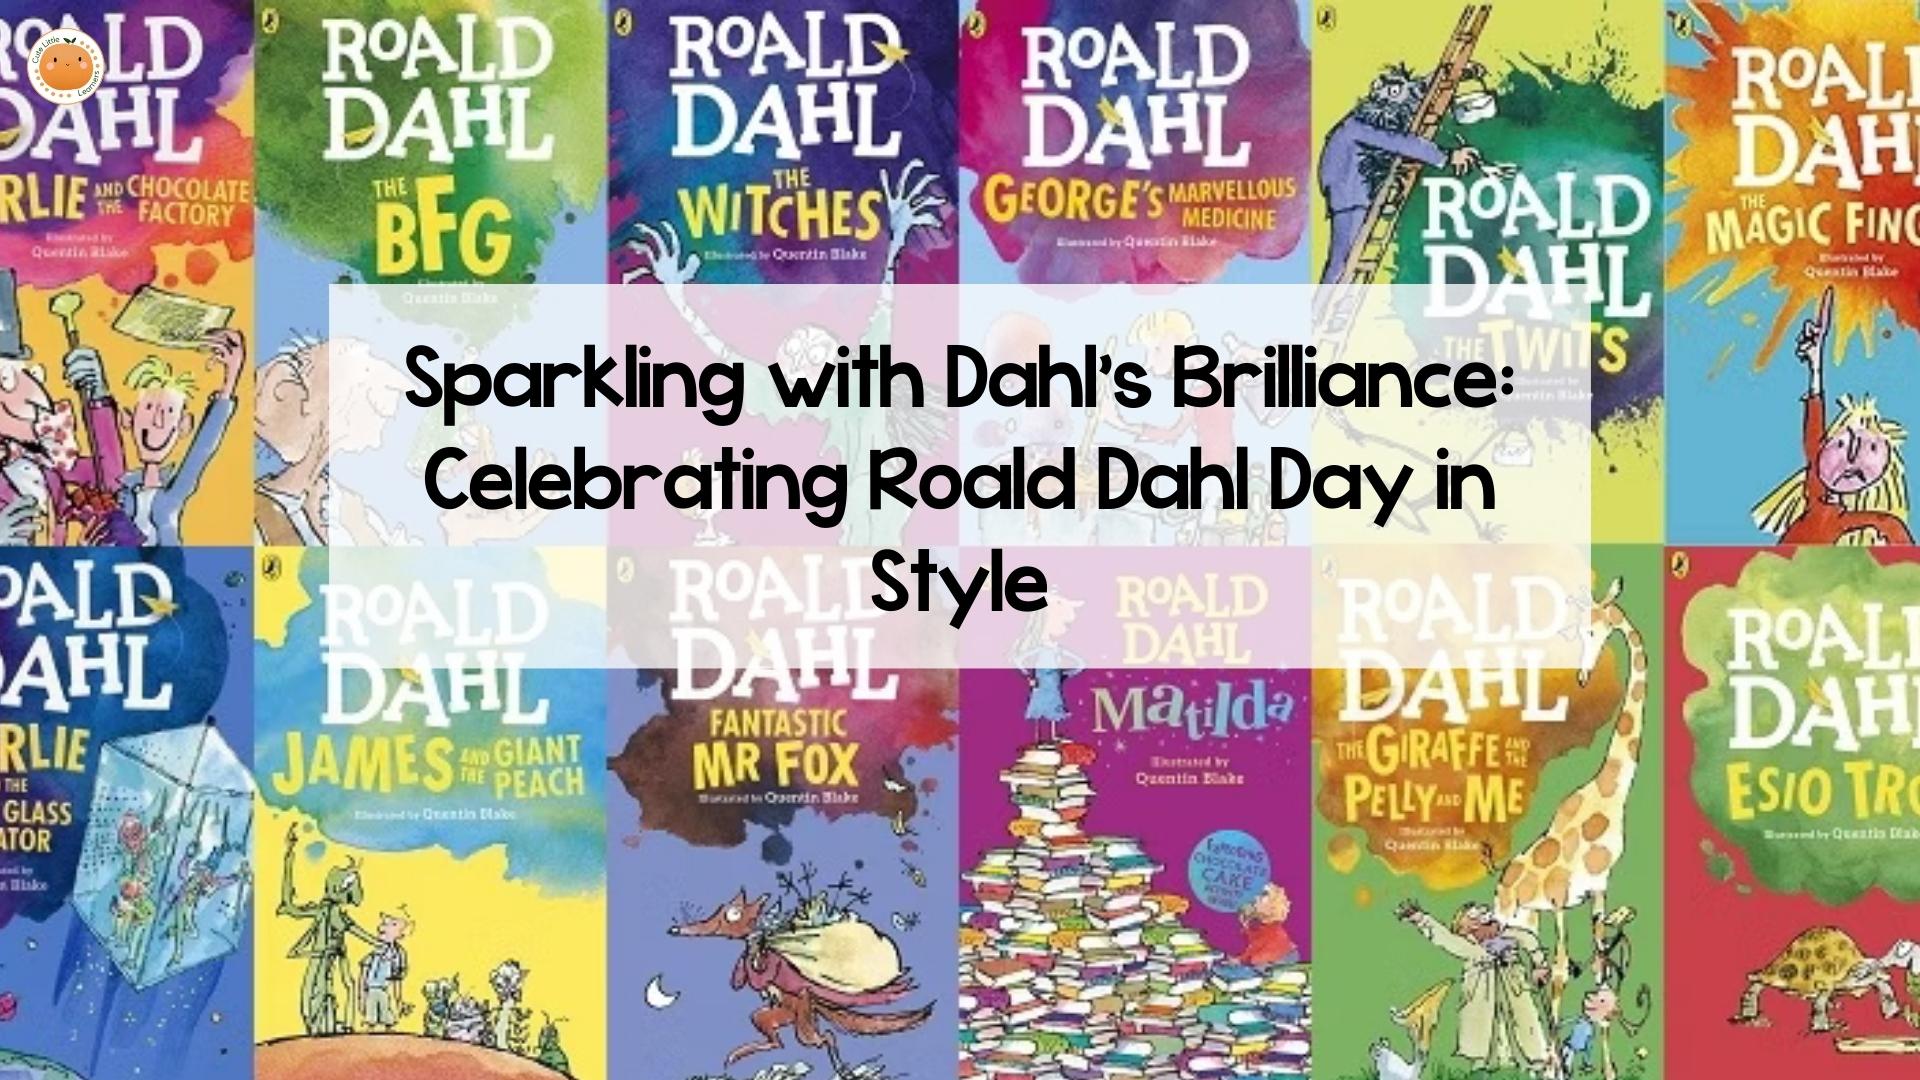 Sparkling with Dahl’s Brilliance: Celebrating Roald Dahl Day in Style